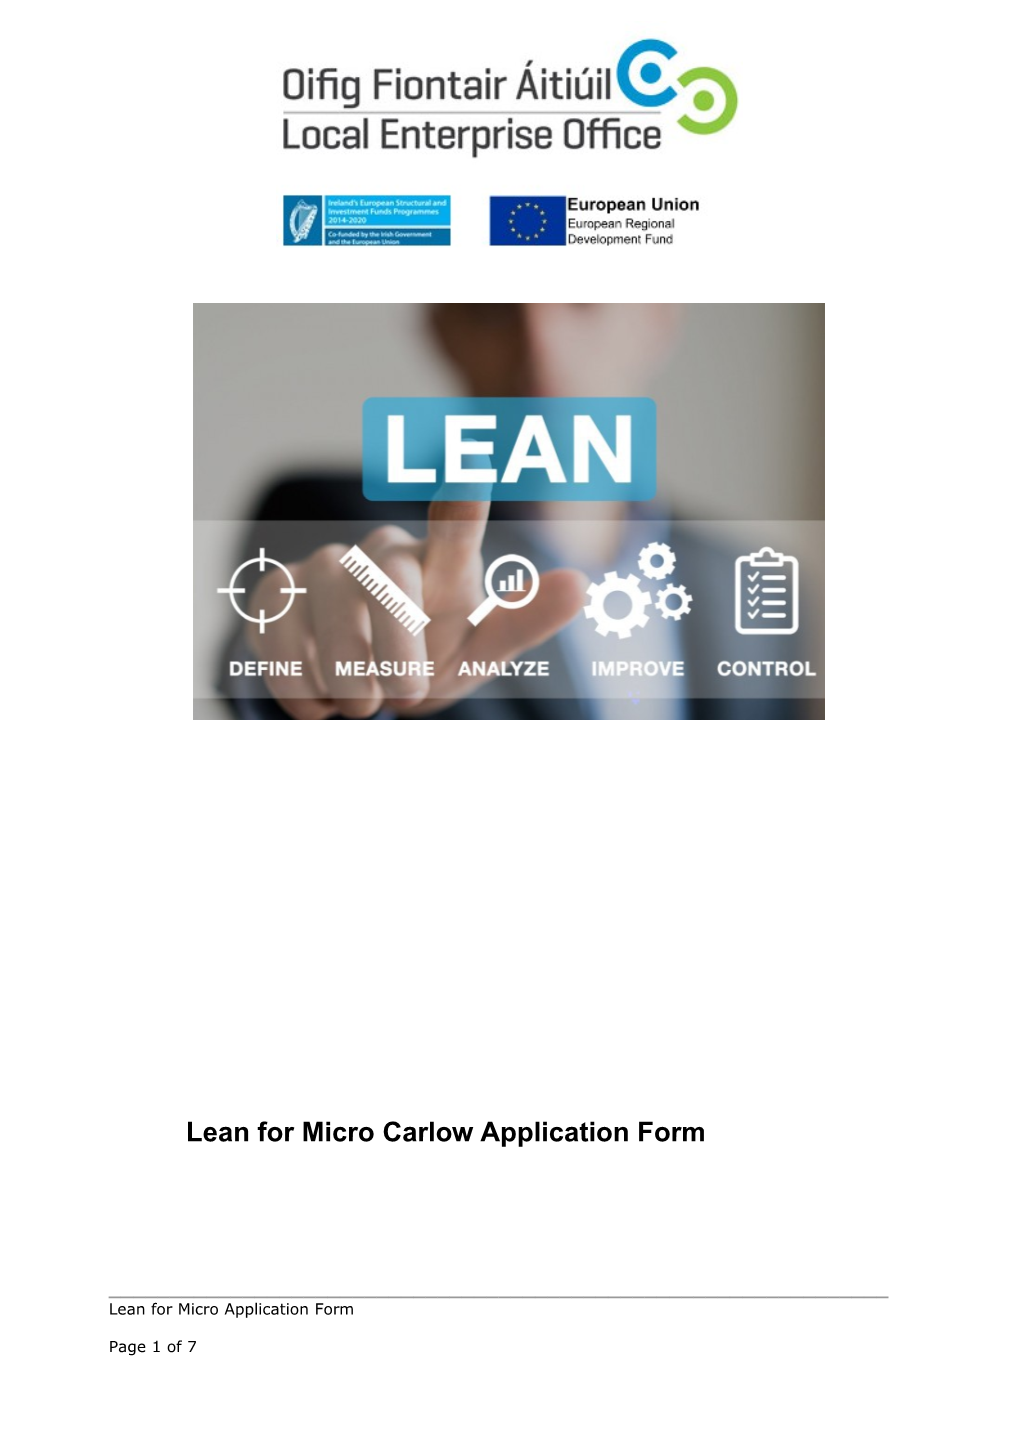 Lean for Micro Carlowapplication Form